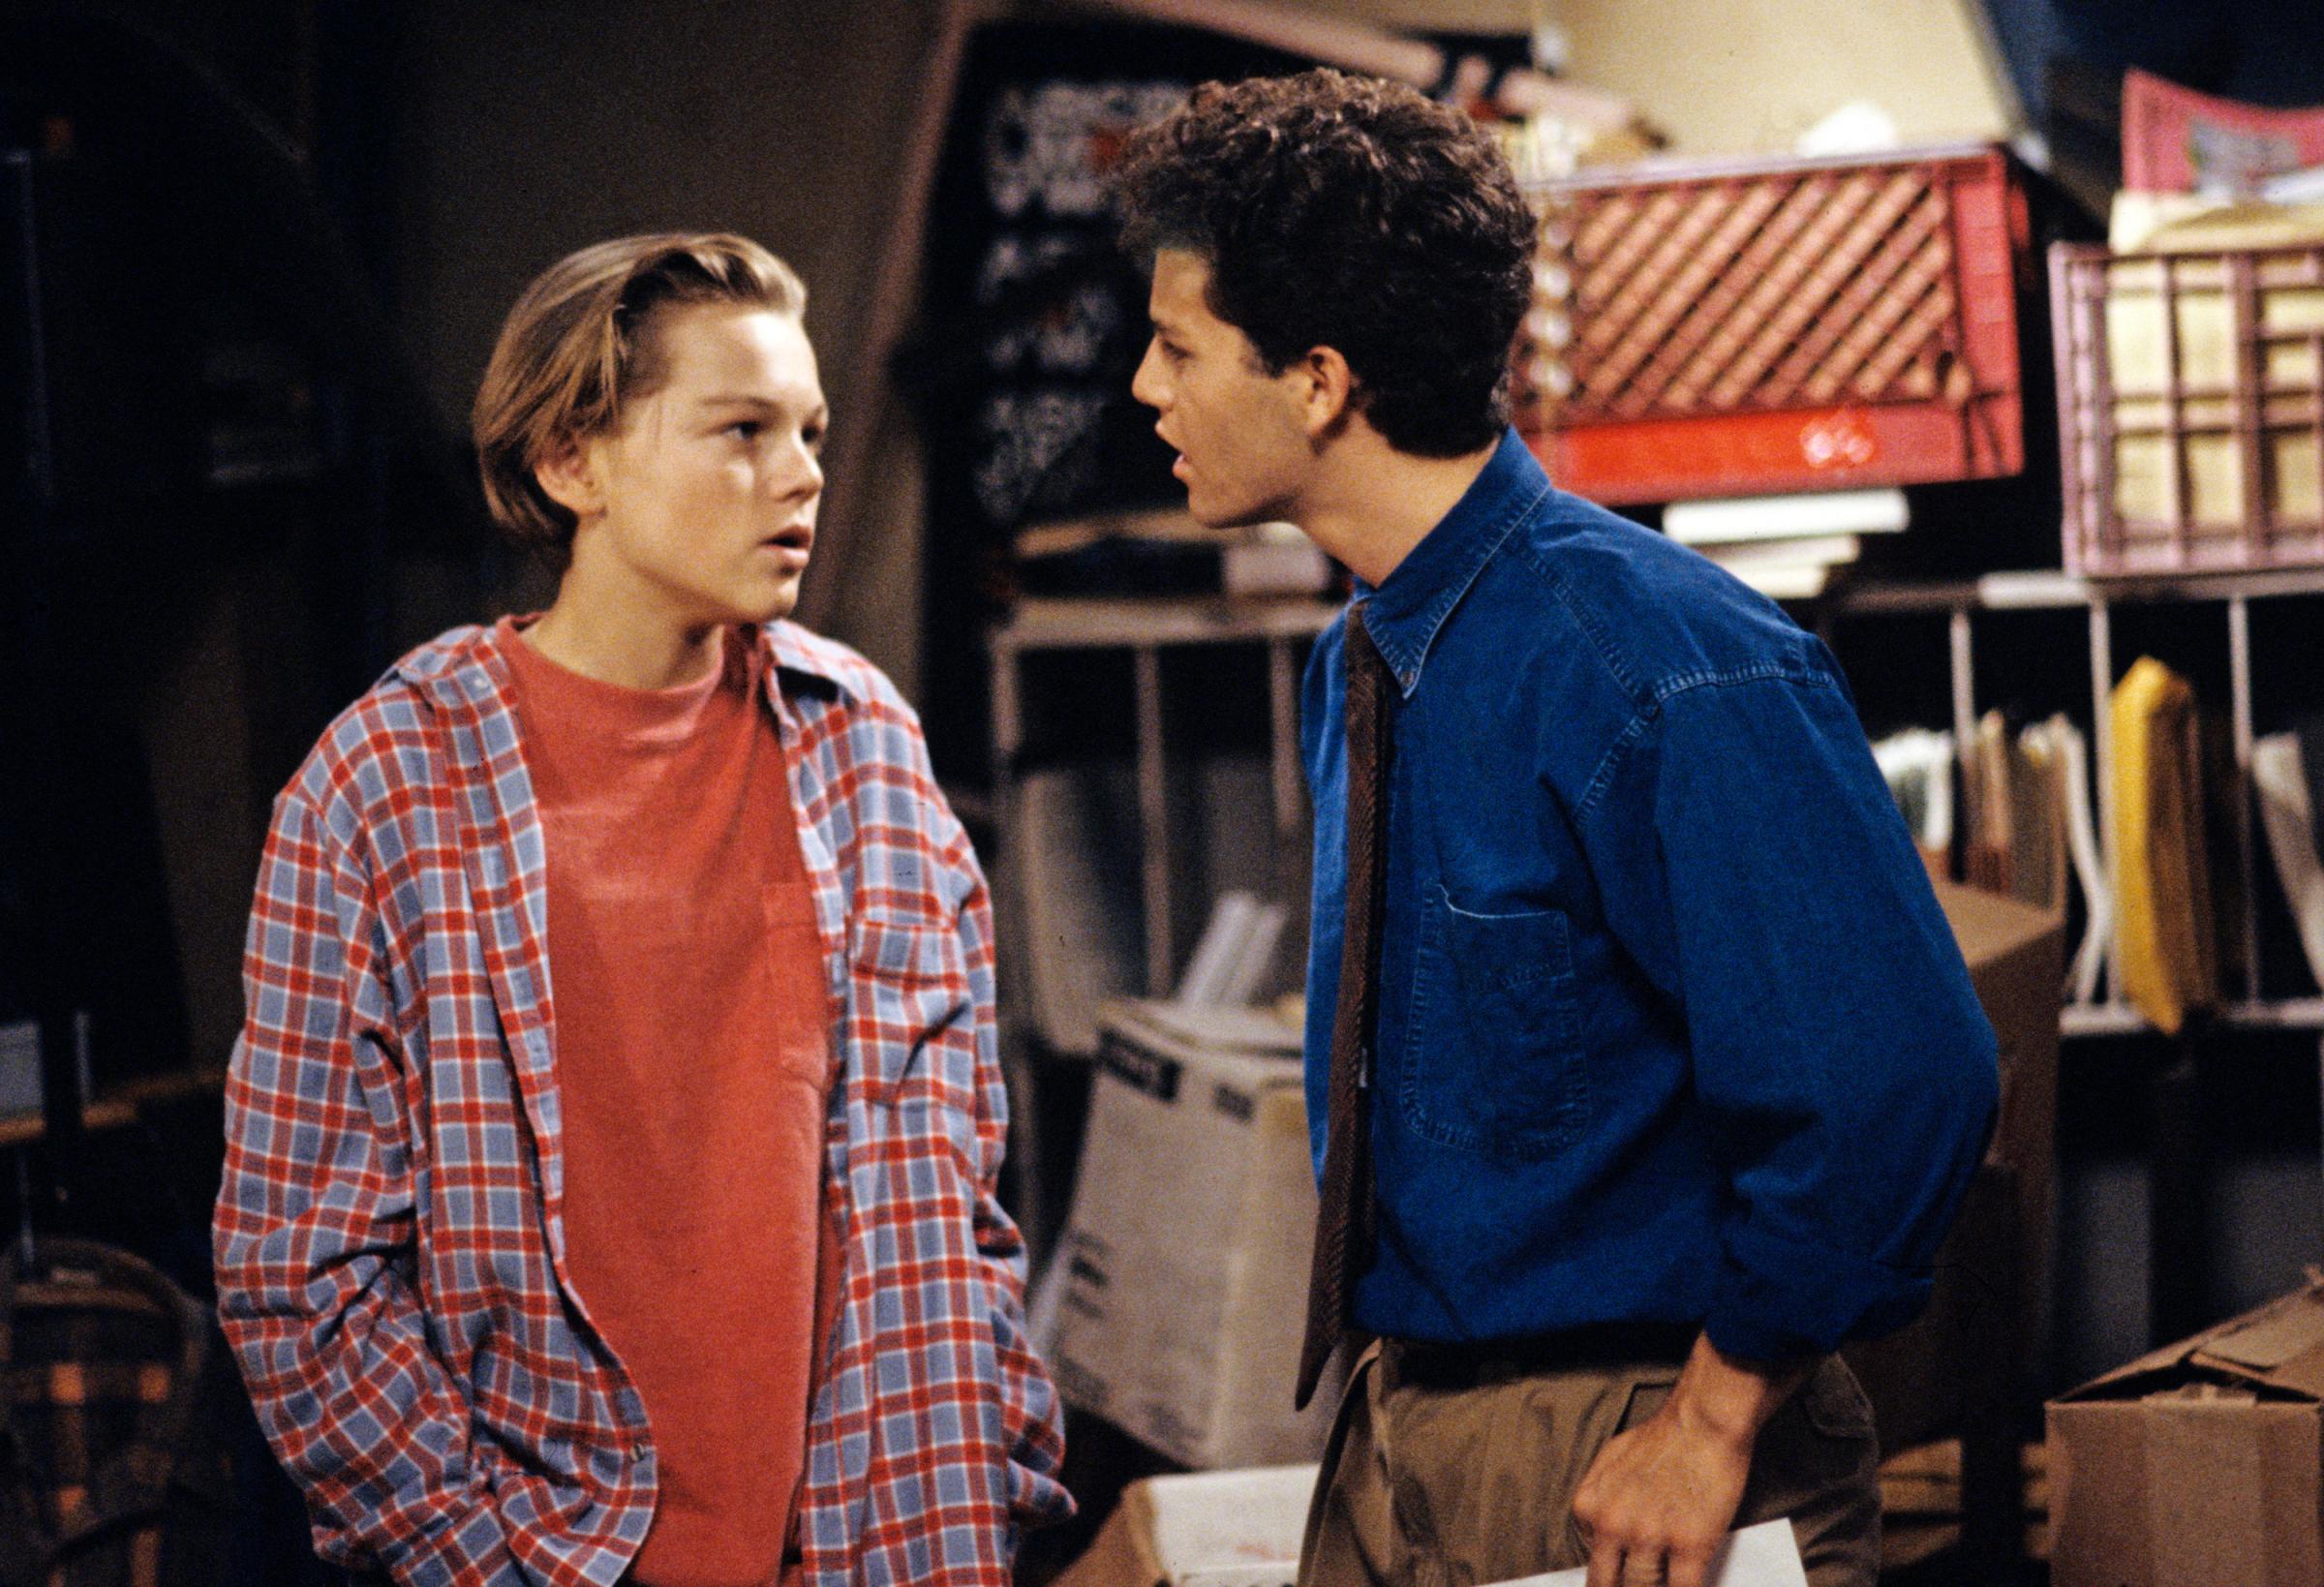 From left: Leonardo DiCaprio, as Luke Brower, and Kirk Cameron, as Mike Seaver, in a still from Growing Pains in 1991.